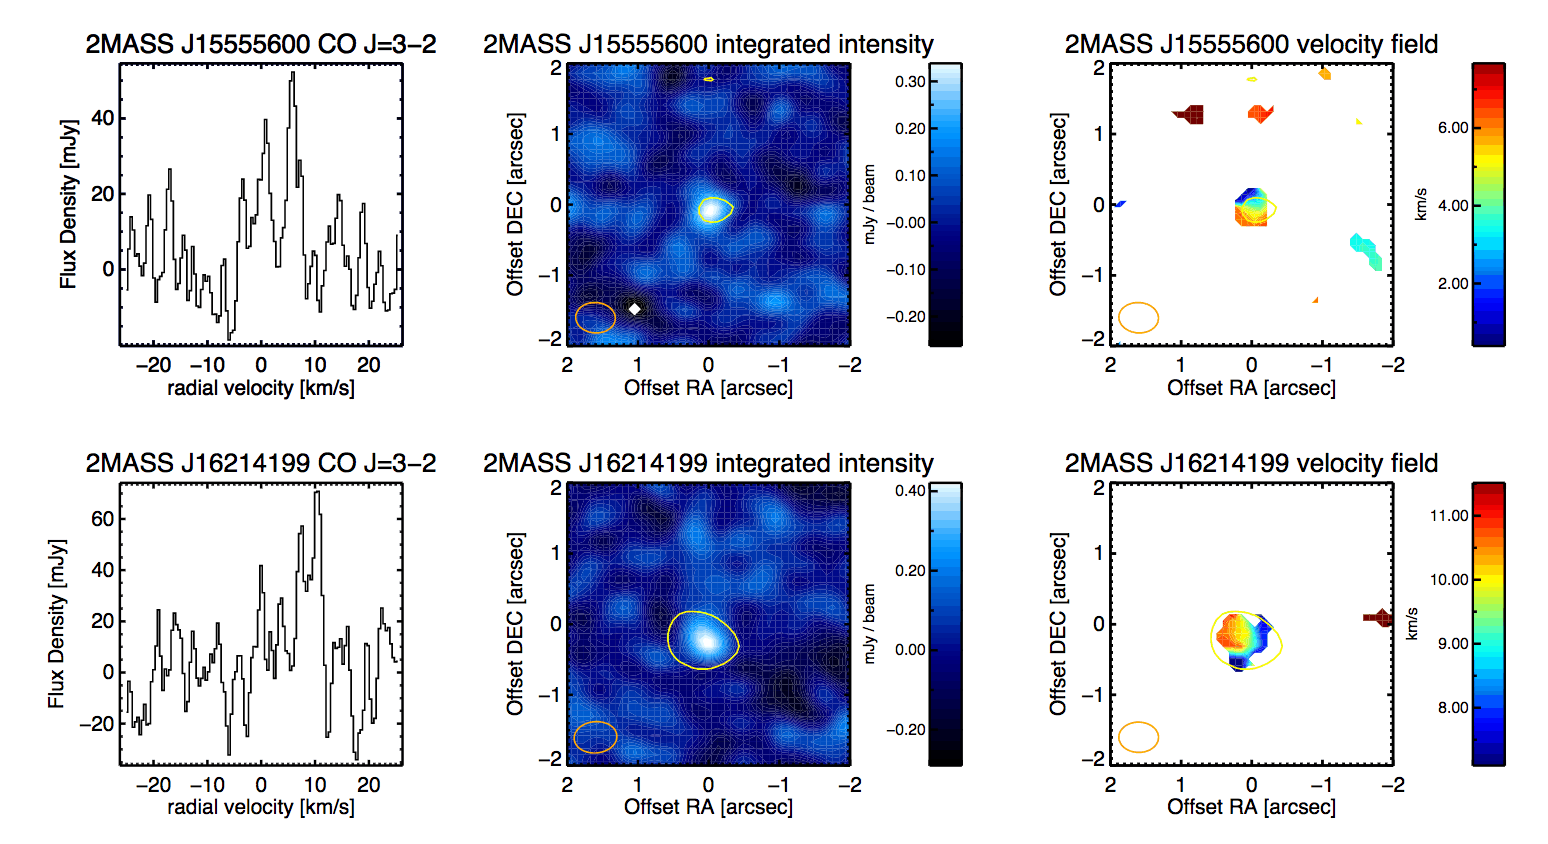 Summary figure for the two disks with detected CO J=3-2 emission. From left to right I show the intergrated cine profile, the integrated intensity (moment 0), and the velocity (moment 1) map. 